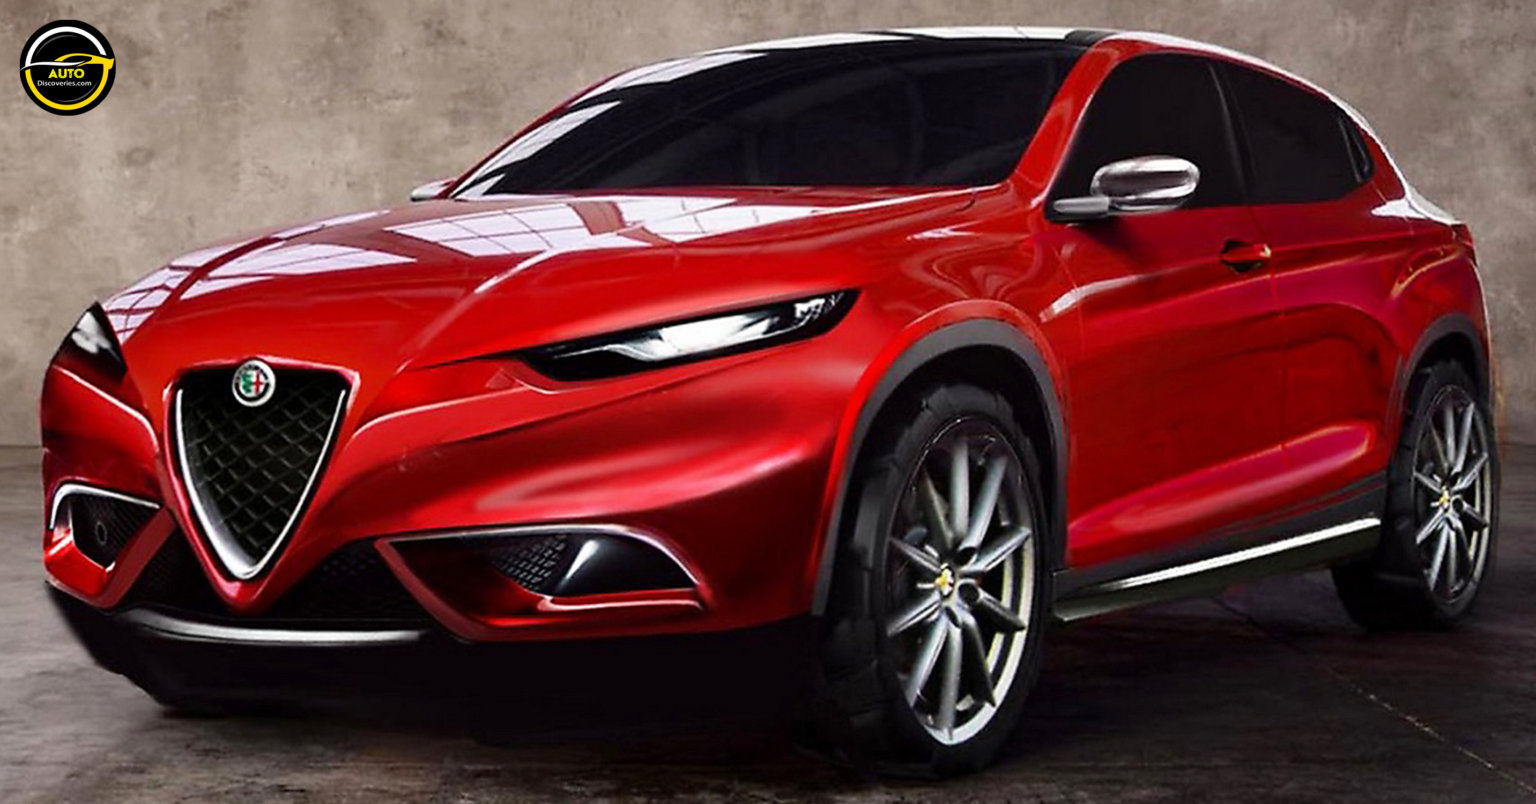 New Alfa Romeo Brennero's First Pure Electric SUV, Launched In 2024